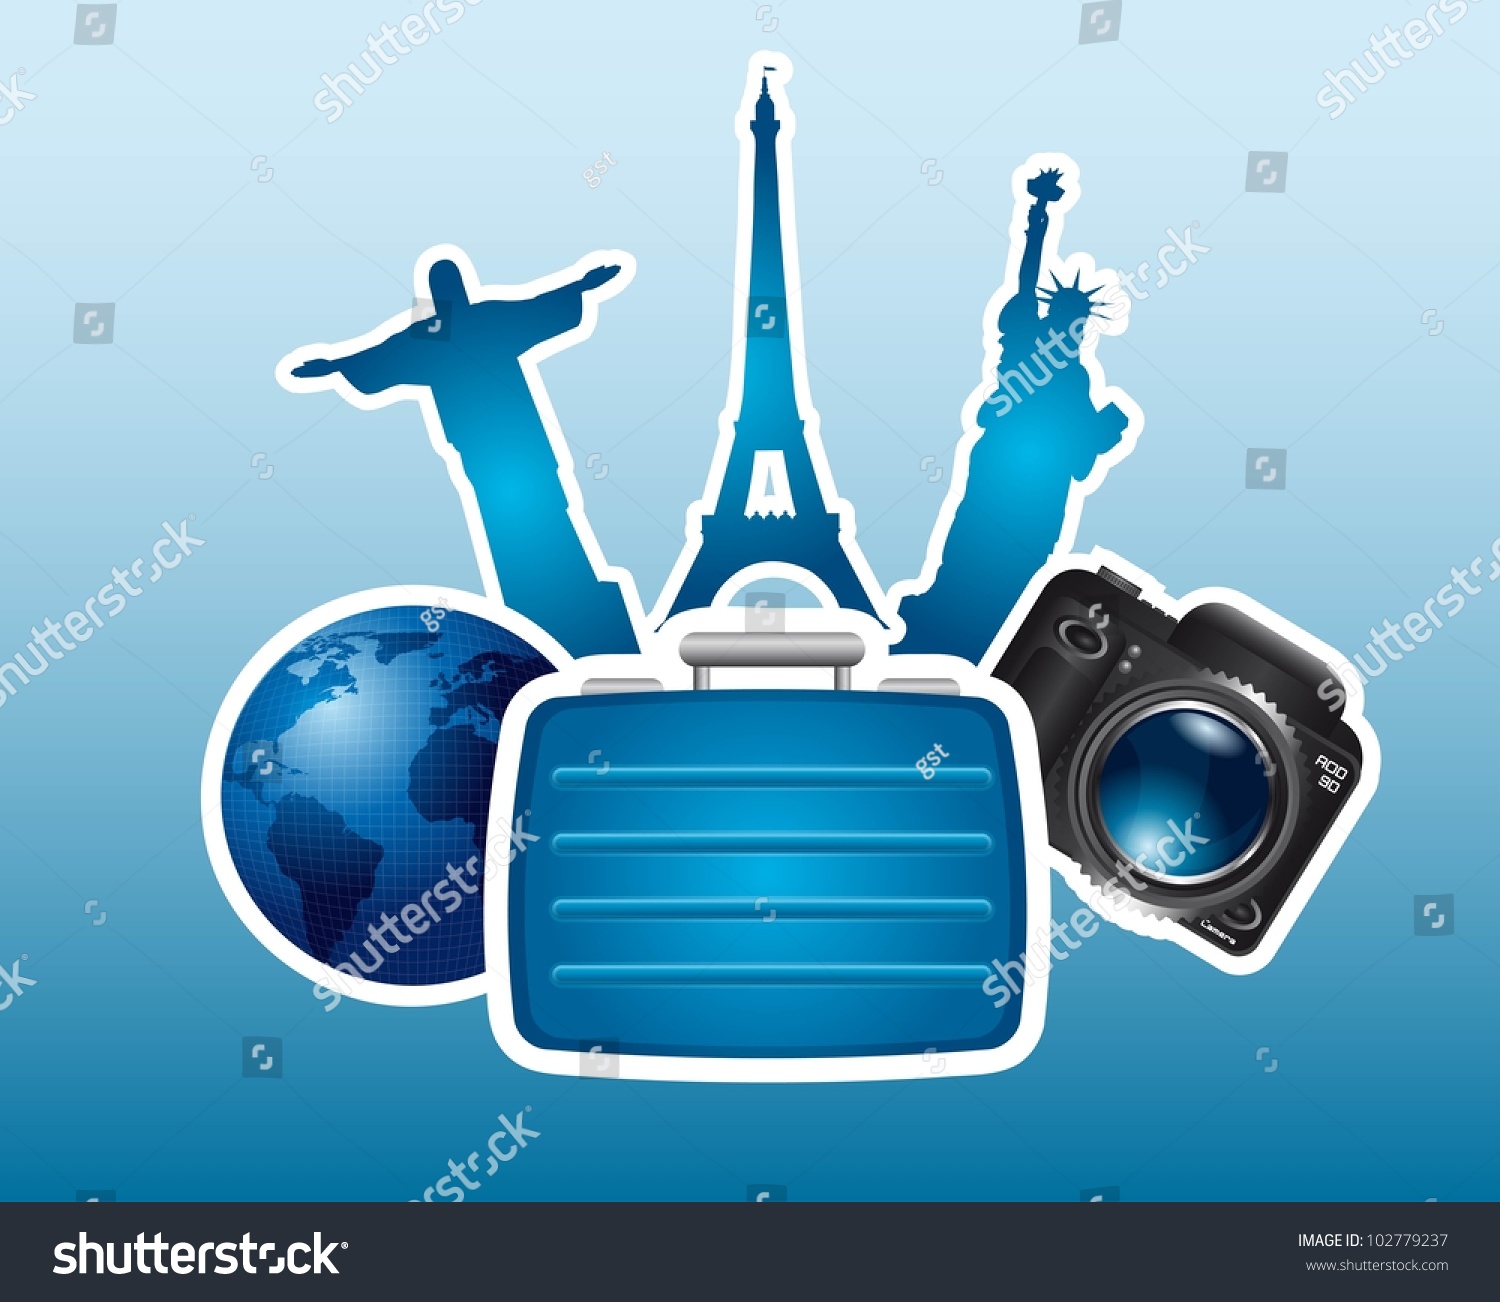 SVG of silhouette monuments with suitcase and camera background. vector svg